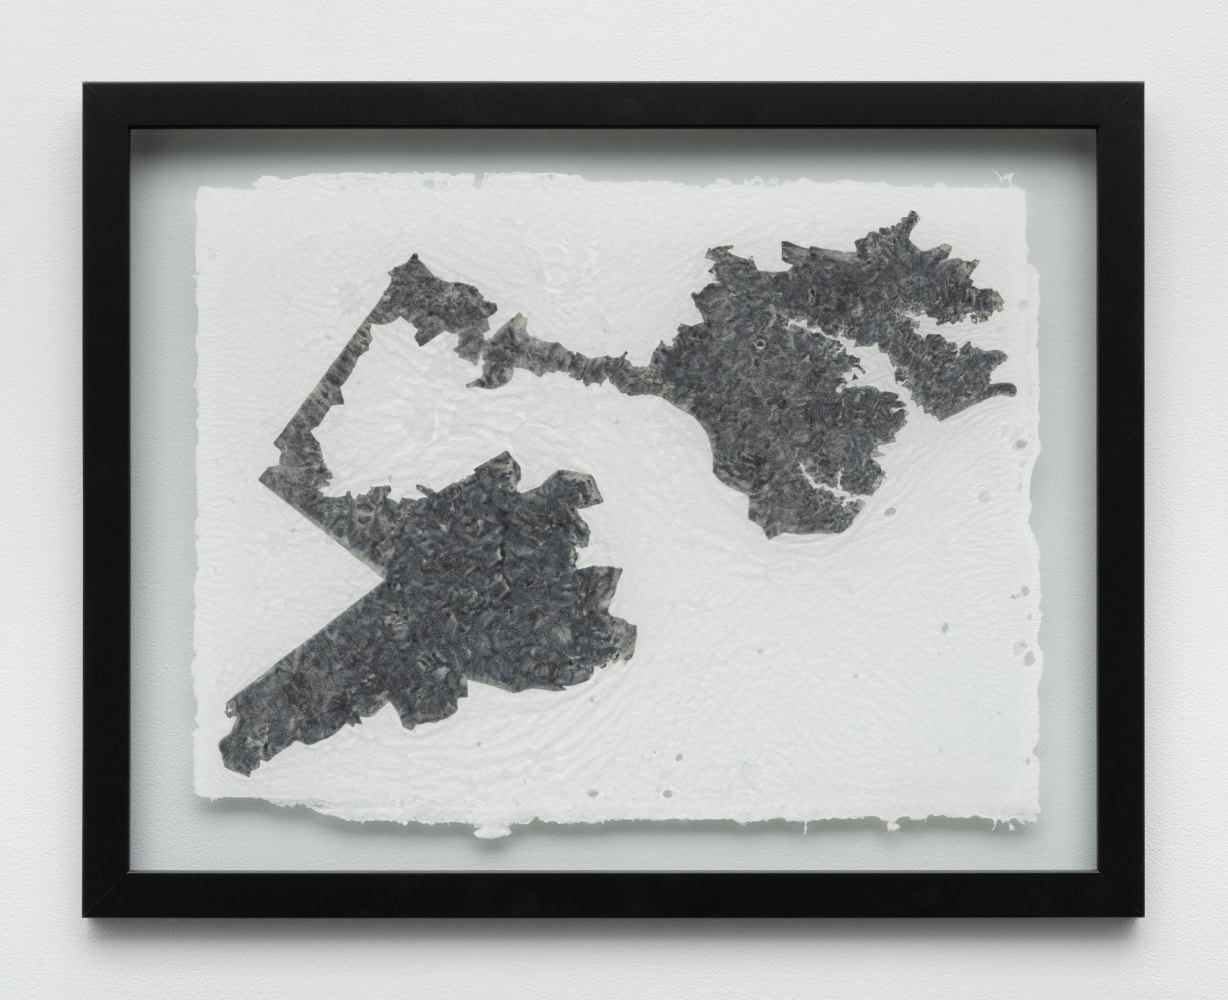 jina valentine
LITERACY TEST: RORSCHACH, 2016
Iron gall ink on paper made from Sea Isle Cotton shirts
17 &amp;frac34; &amp;times; 22 &amp;frac12; in.
(45.1 &amp;times; 57.2 cm)